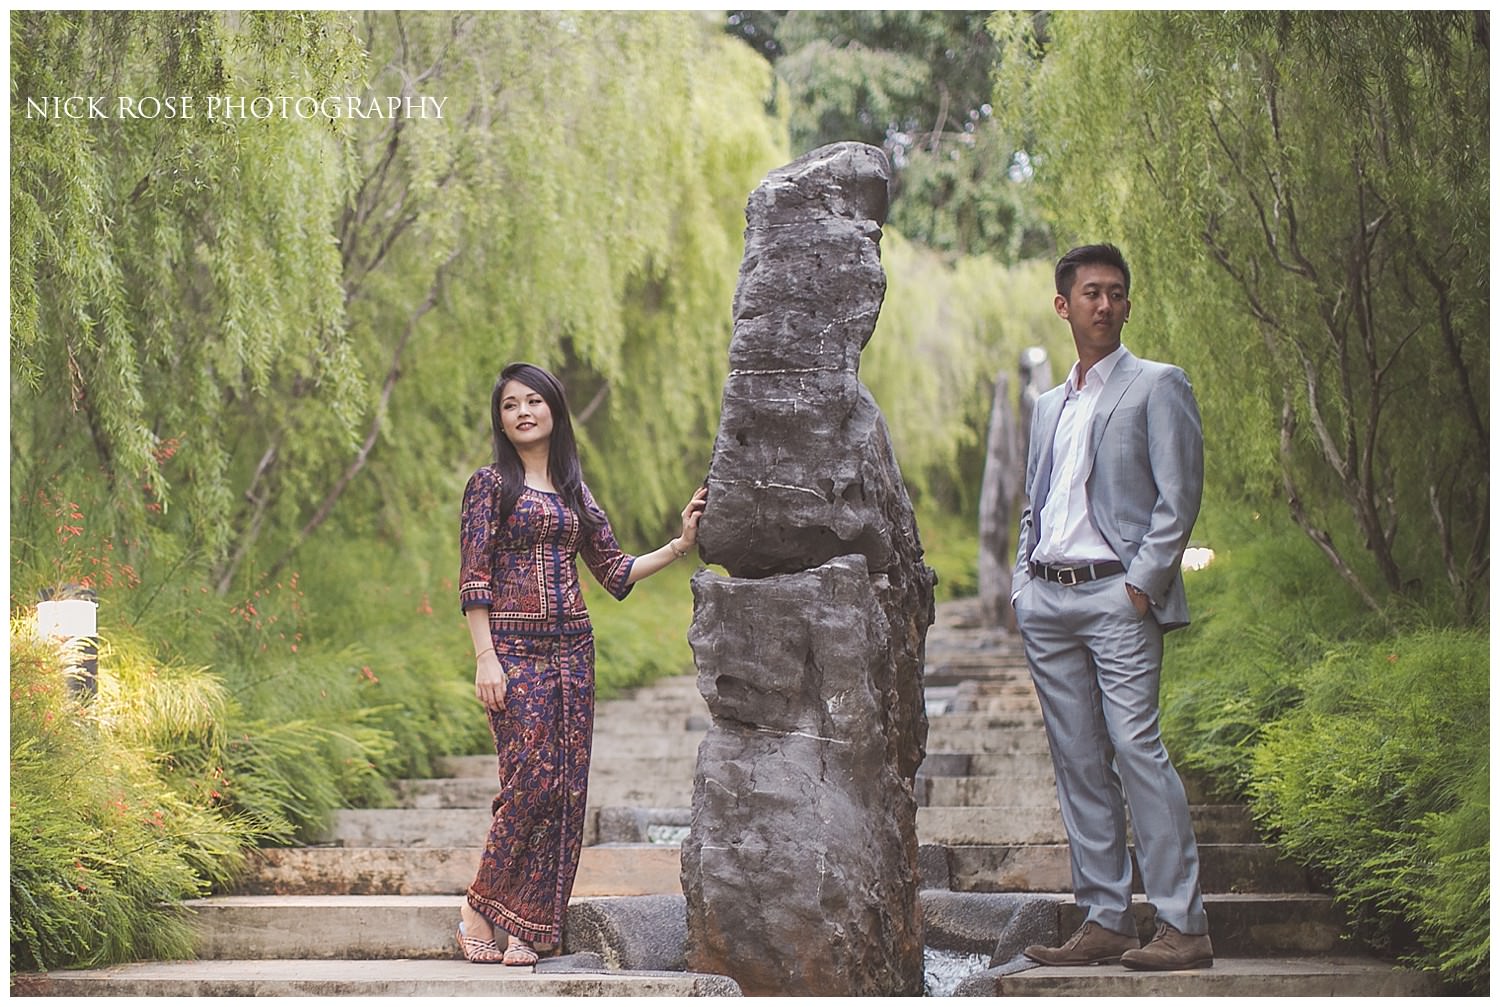  Couple pre wedding photography image taken at Gardens by the Bay in Singapore 